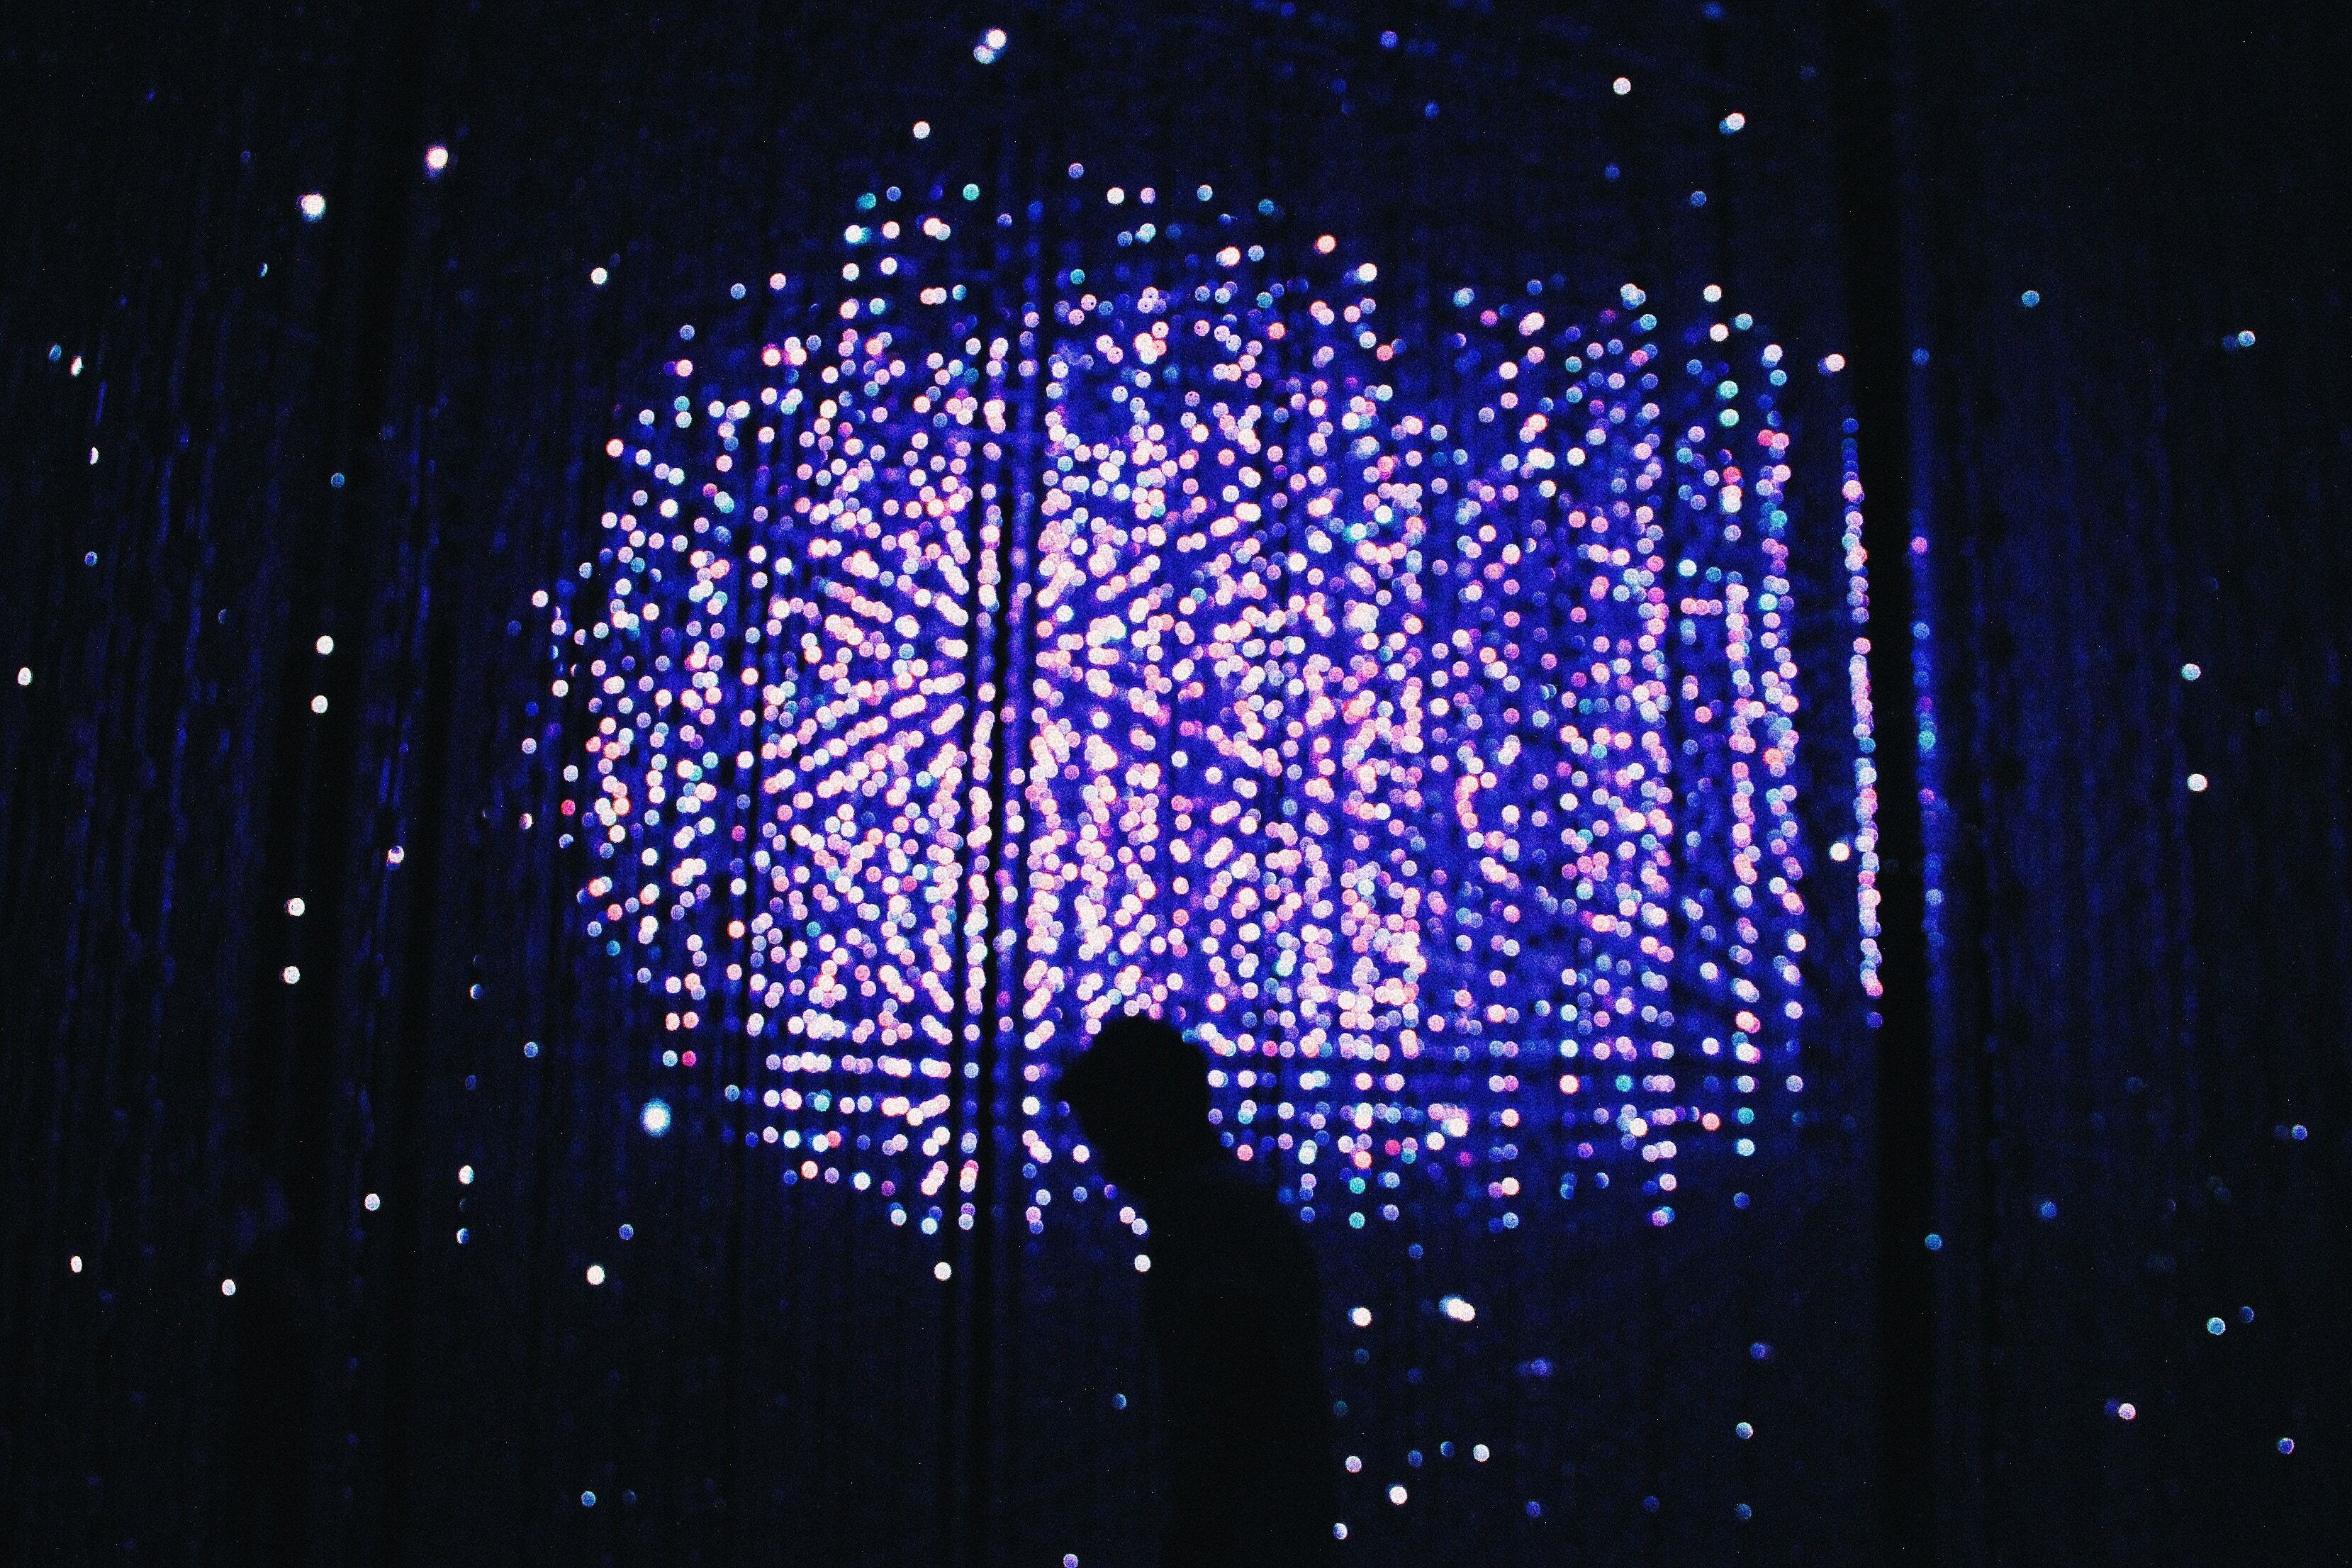 Image of a man walking in front of a wall of lights at night